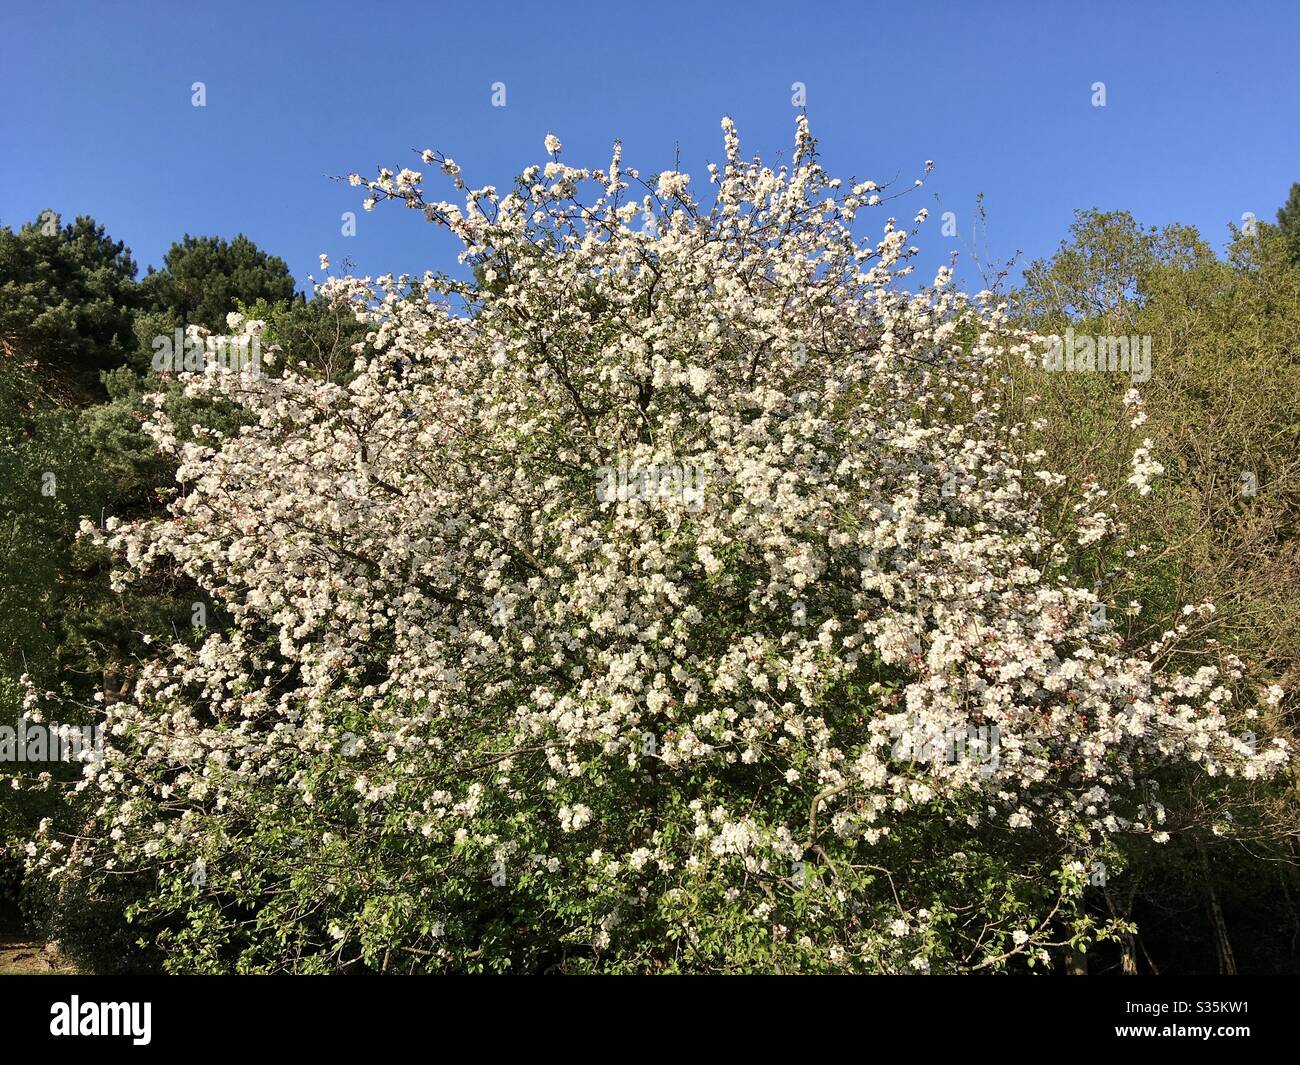 Wild crab apple tree in blossom in a woodland setting under a blue sky Stock Photo